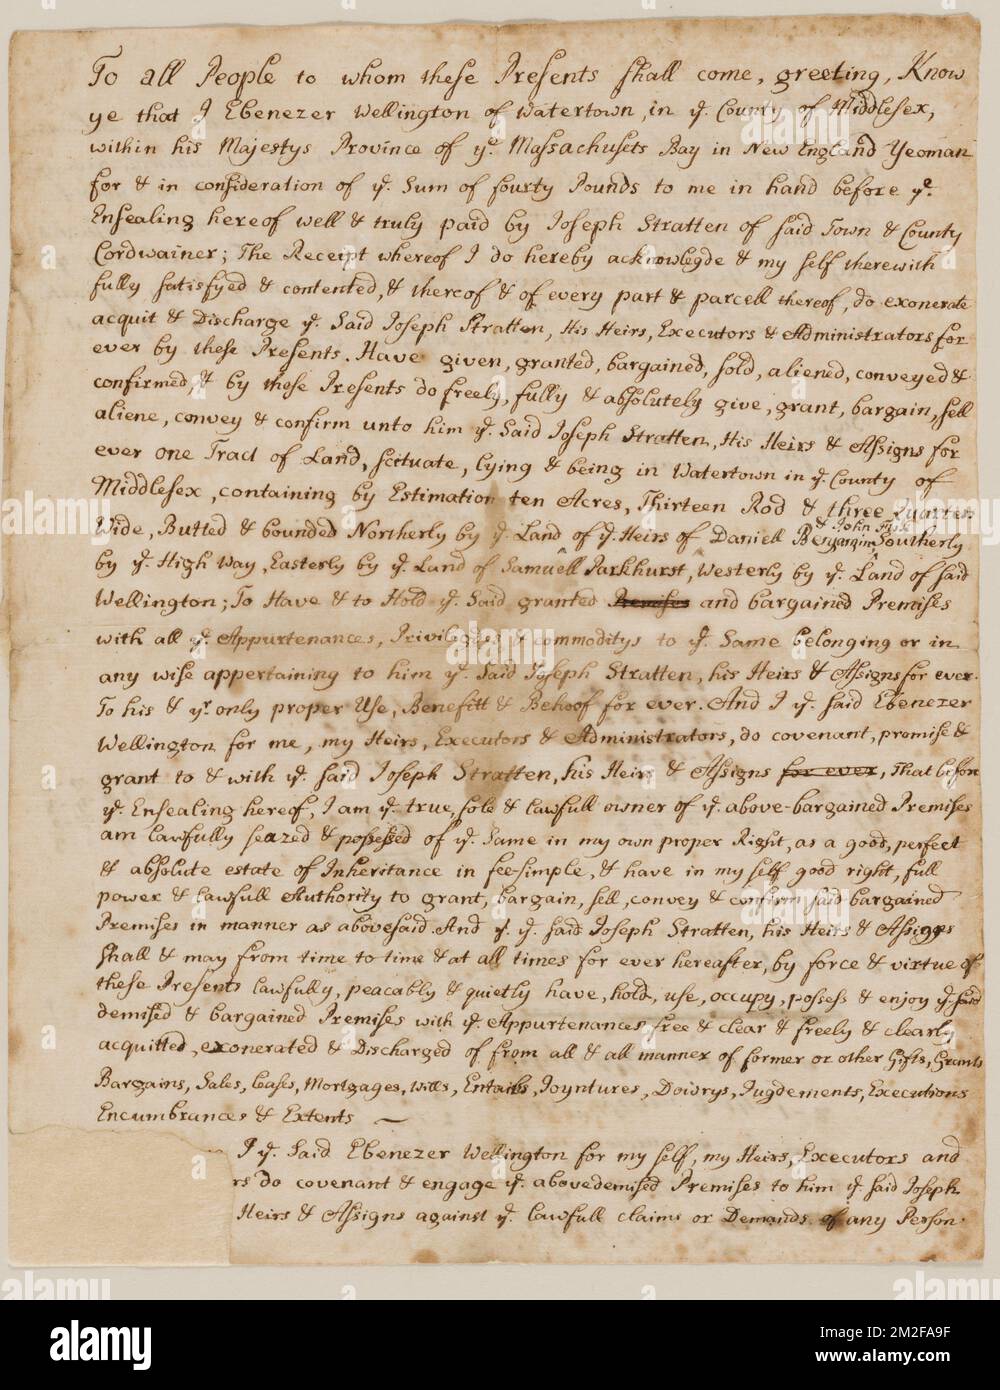 Deed from Ebenezer Wellington to Joseph Stratten for 10 acres land in Watertown, in consideration of 50£; reverse used by Joshua Child for tax calculations , Real property Stock Photo